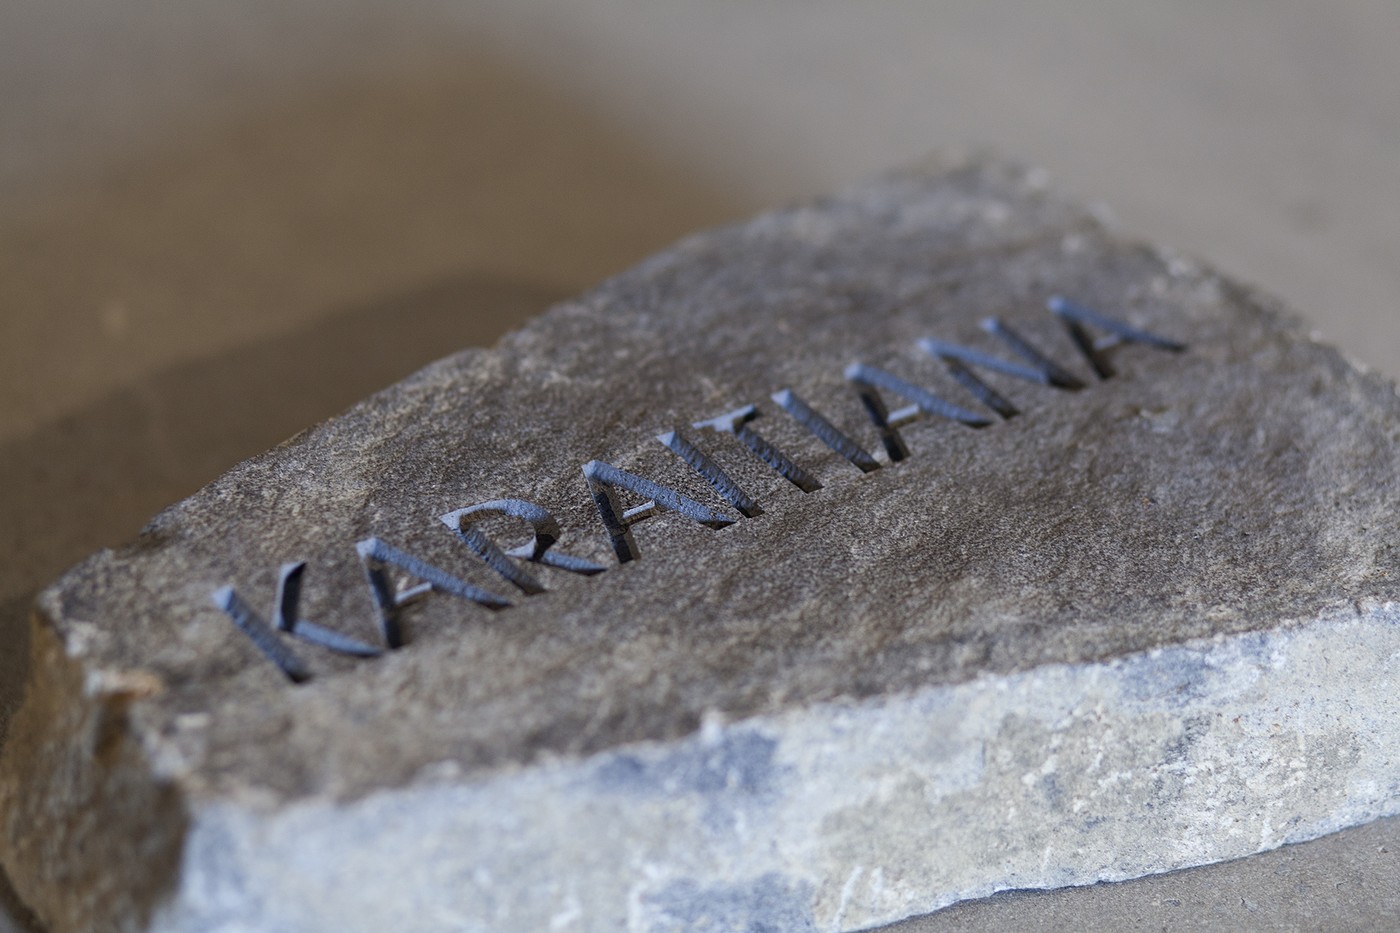 Ana Iti, First, they chose a name, 2016Recycled Halswell quarry stone with engraving, audioCourtesy of the artist